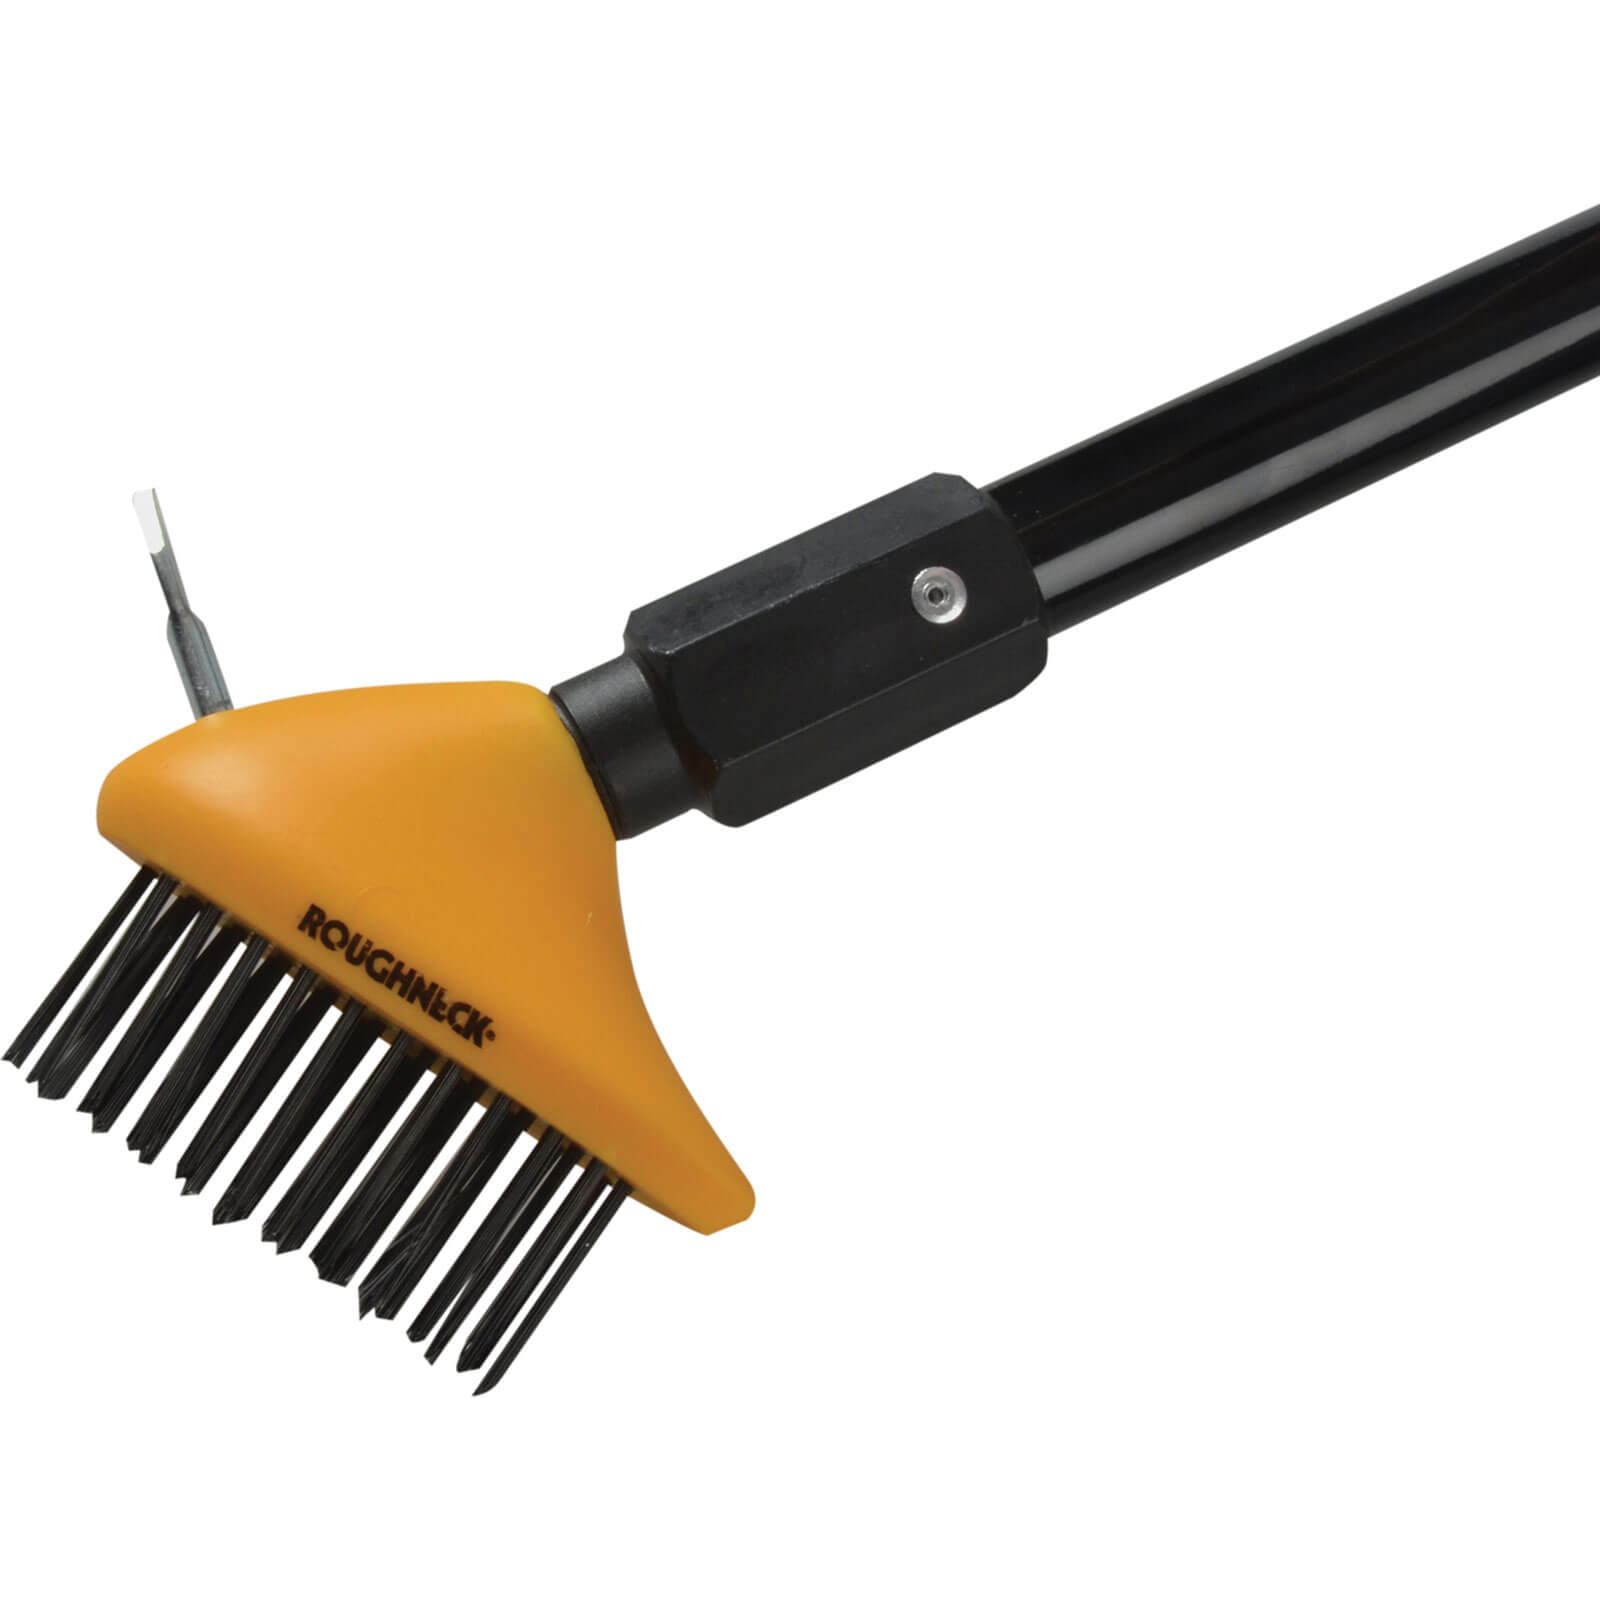 Roughneck Heavy Duty Patio Brush with 1.5 Metre Handle